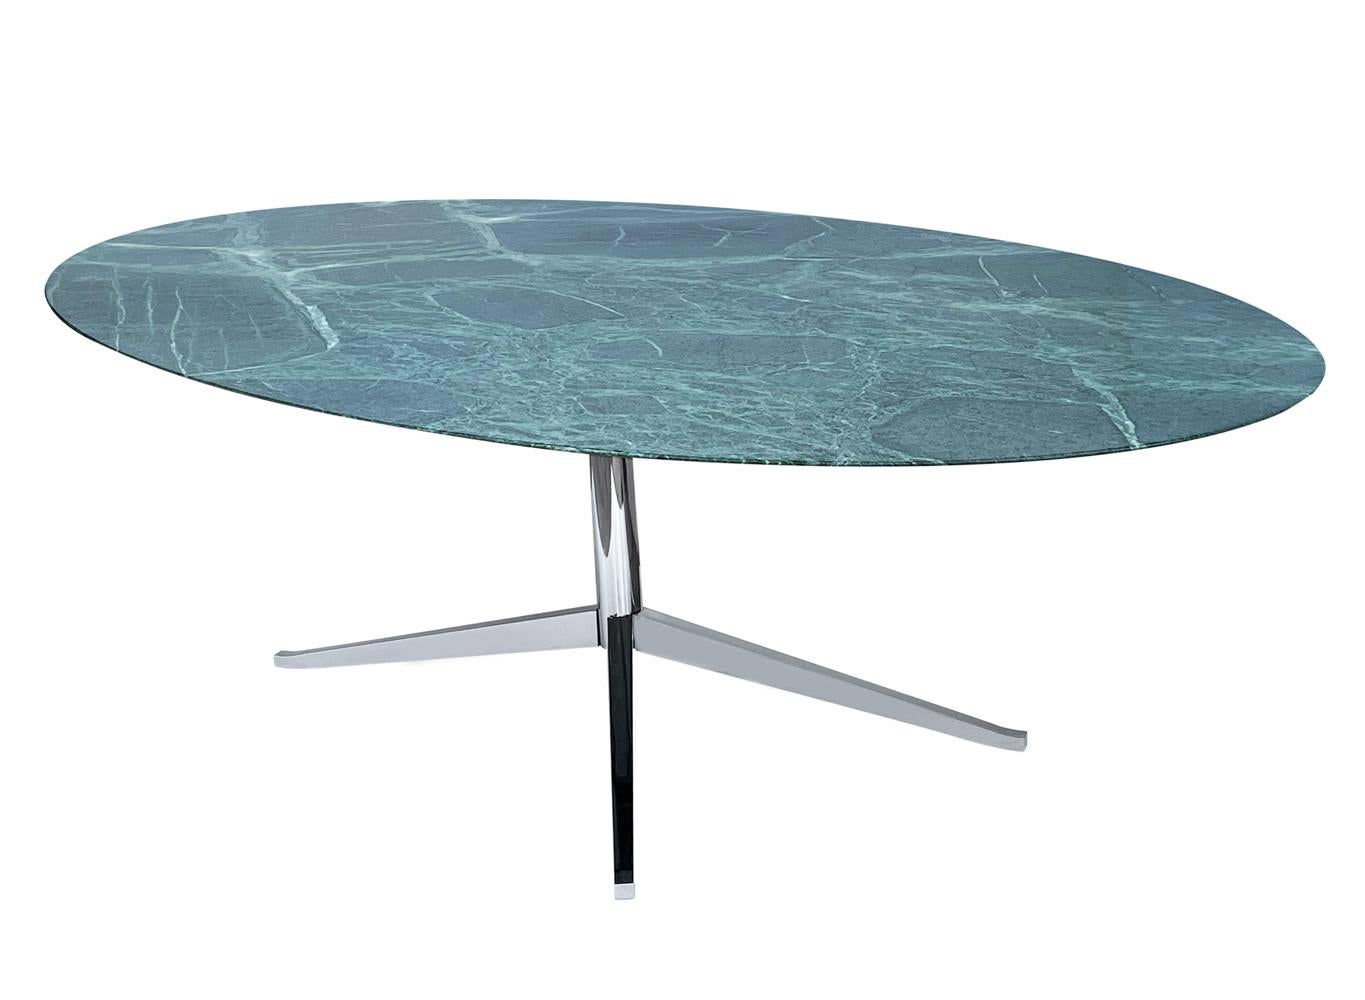 American Florence Knoll Mid-Century Modern Oval Green Verde Marble Dining Table or Desk